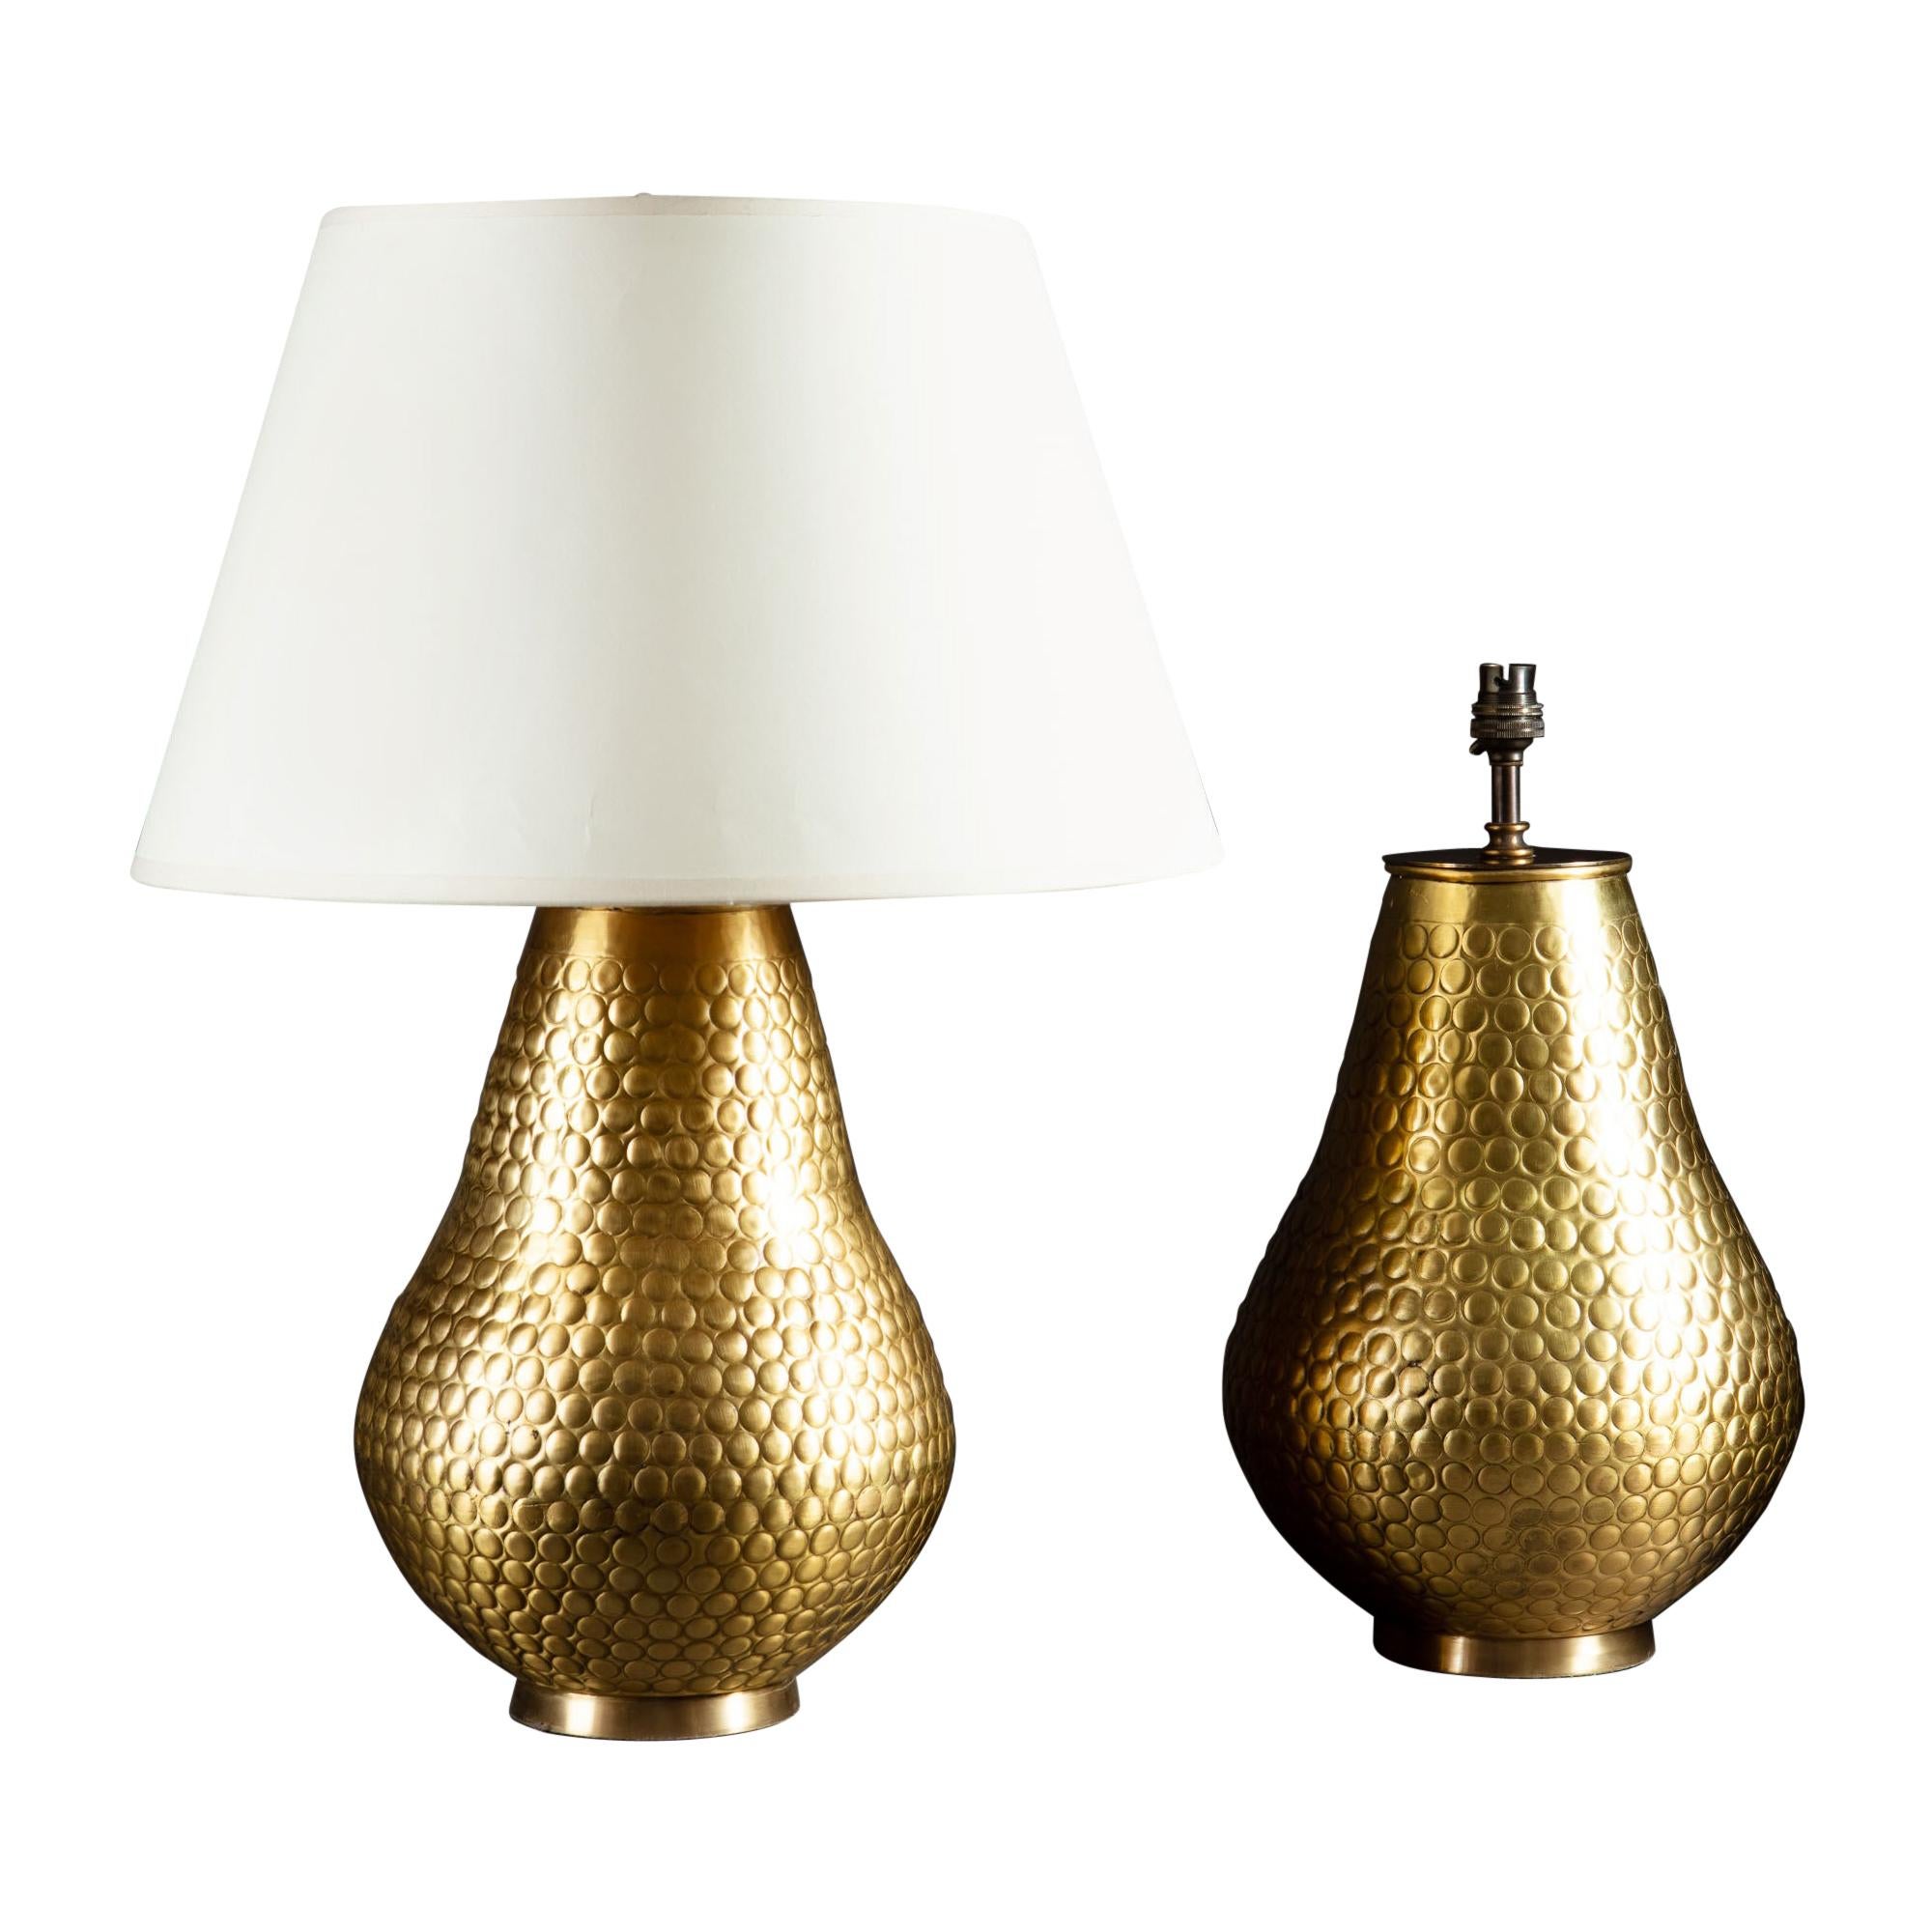 Pair of Brass Punched Metal Vases as Table Lamps For Sale